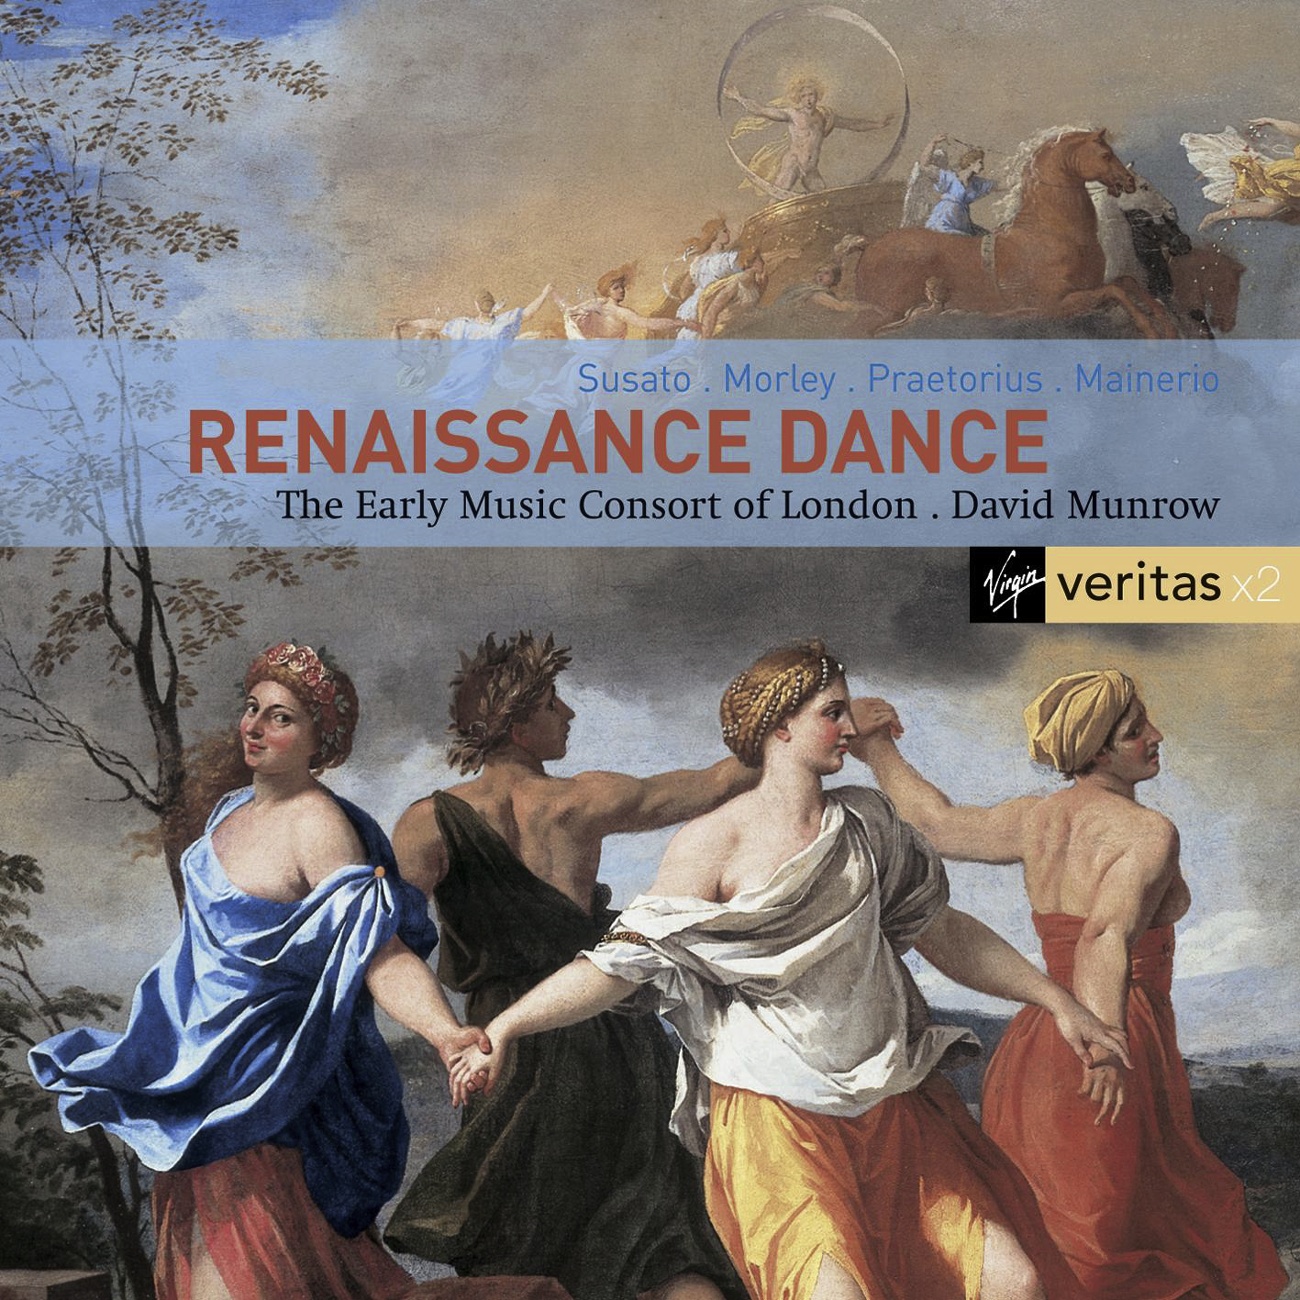 Dances from Broken Consort from Thomas Morley/ First Book of Consort (2005 Digital Remaster): My Lord of Oxenford's Maske (Byrd)